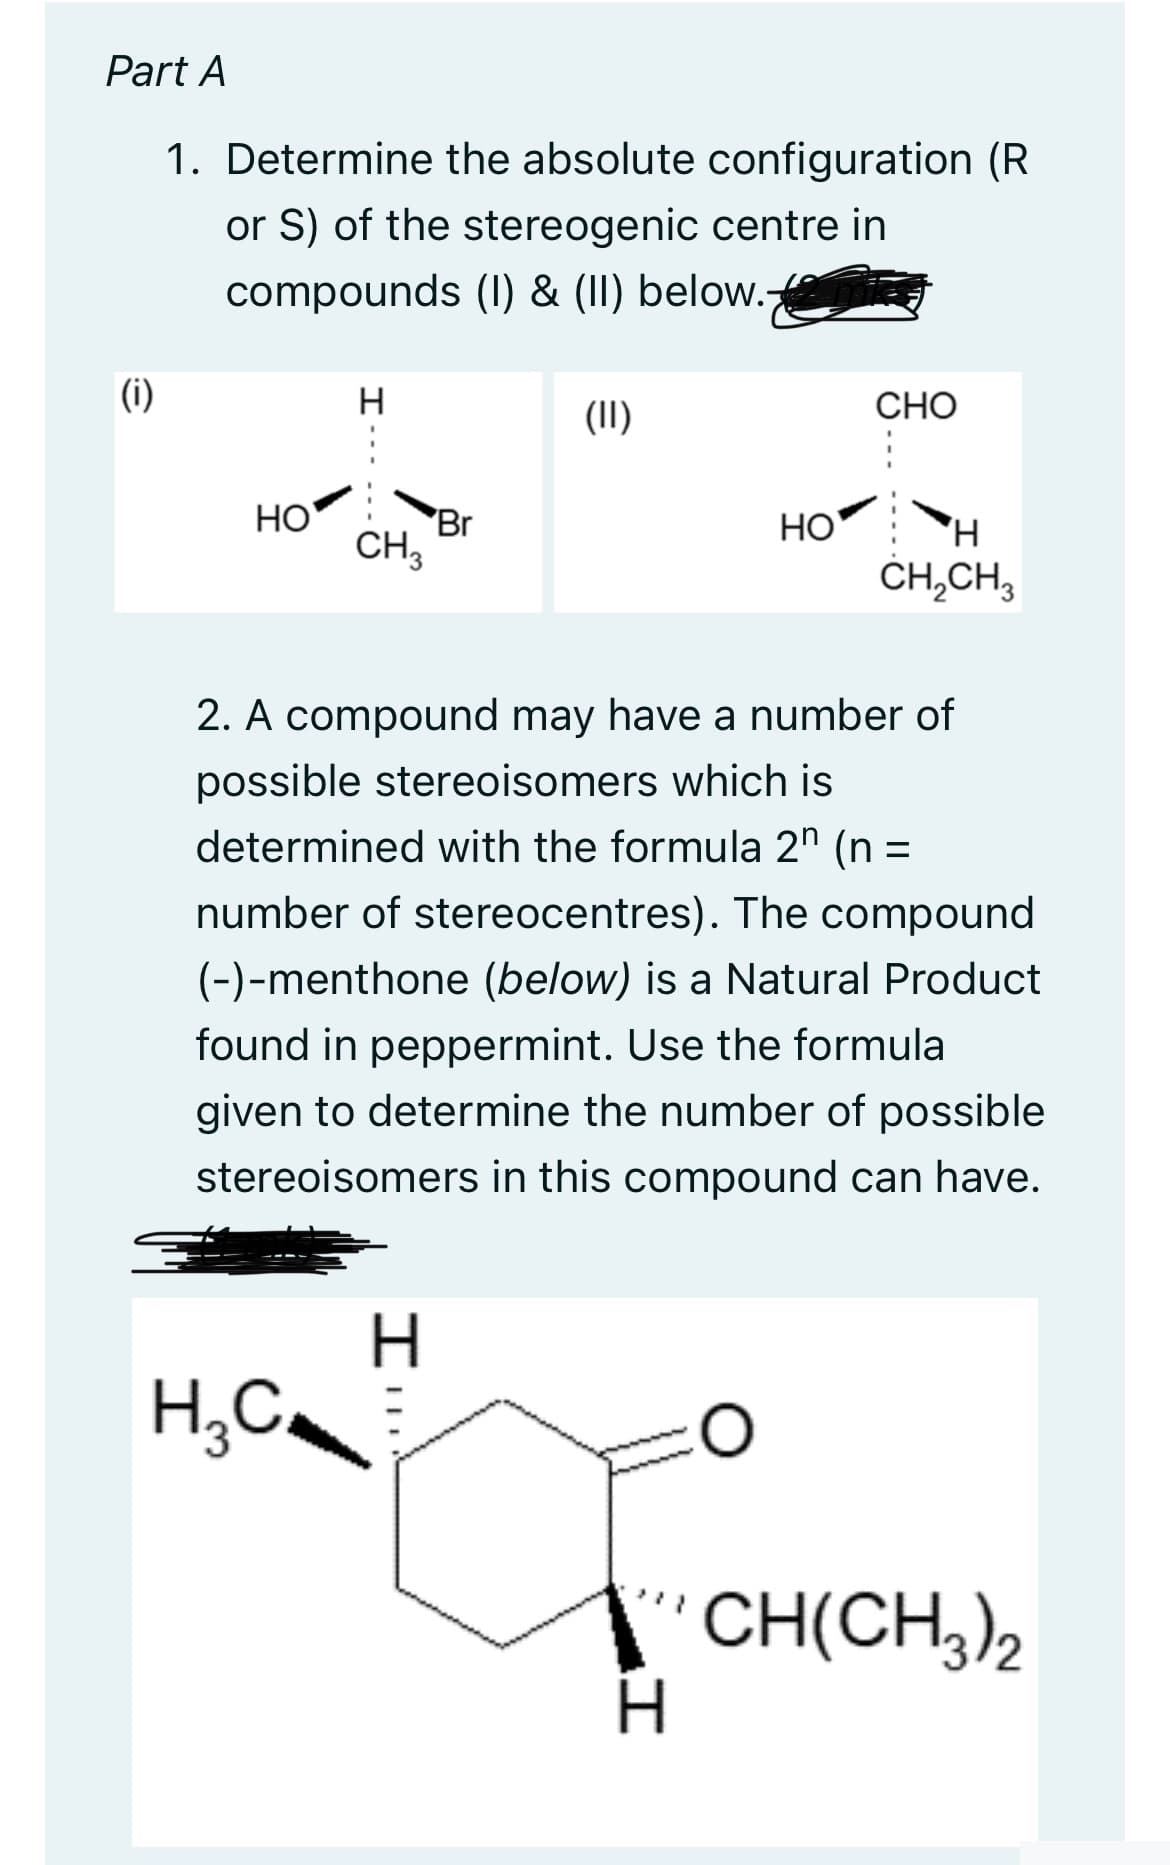 Part A
1. Determine the absolute configuration (R
or S) of the stereogenic centre in
compounds (1) & (II) below.
(i)
HO
H
H₂C
CH 3
Br
H
(II)
HO
2. A compound may have a number of
possible stereoisomers which is
determined with the formula 2 (n =
number of stereocentres). The compound
(-)-menthone (below) is a Natural Product
found in peppermint. Use the formula
given to determine the number of possible
stereoisomers in this compound can have.
I
CHO
H
CH₂CH3
CH(CH3)2